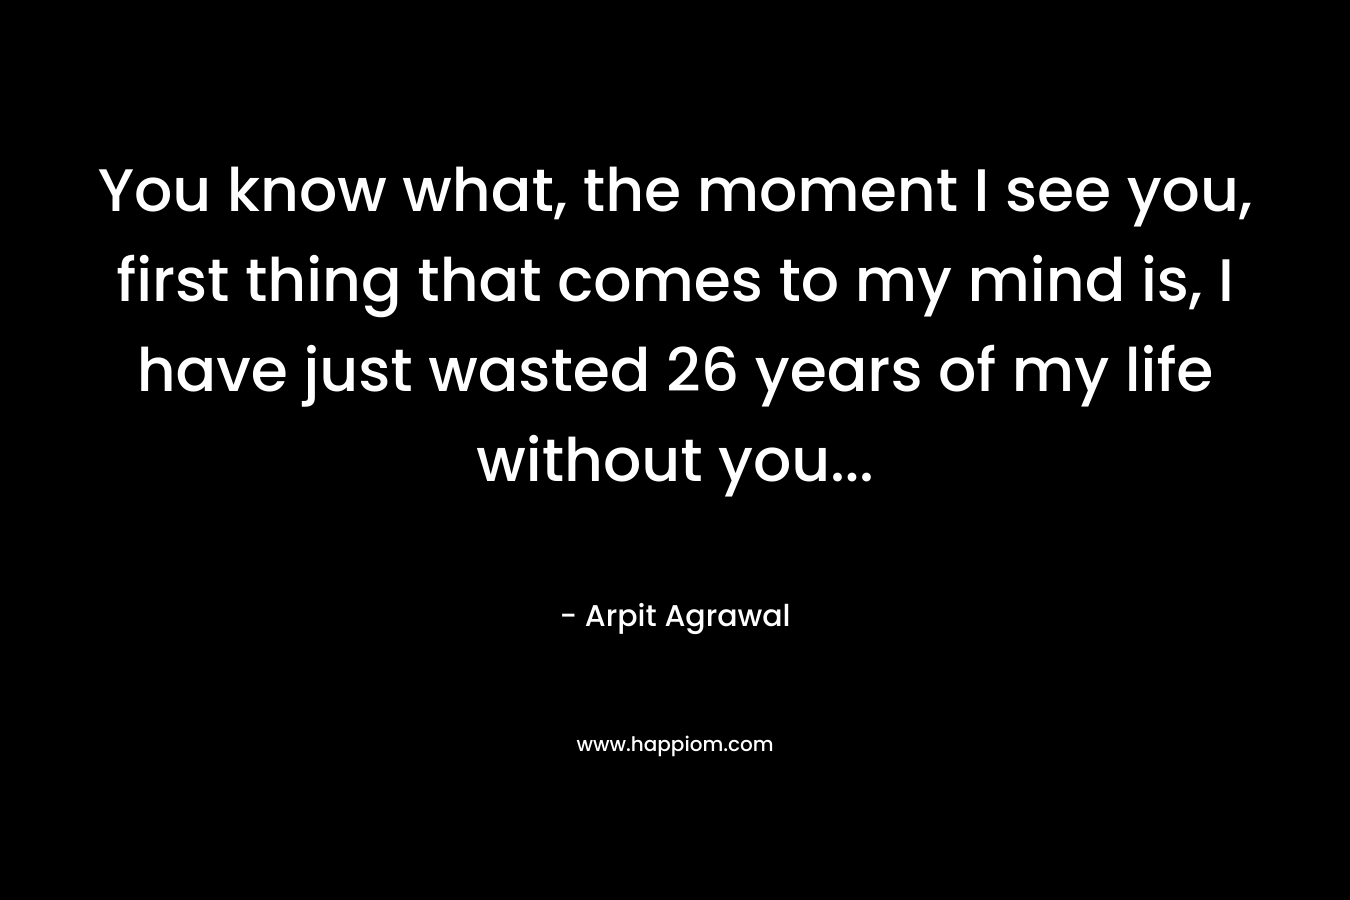 You know what, the moment I see you, first thing that comes to my mind is, I have just wasted 26 years of my life without you… – Arpit Agrawal